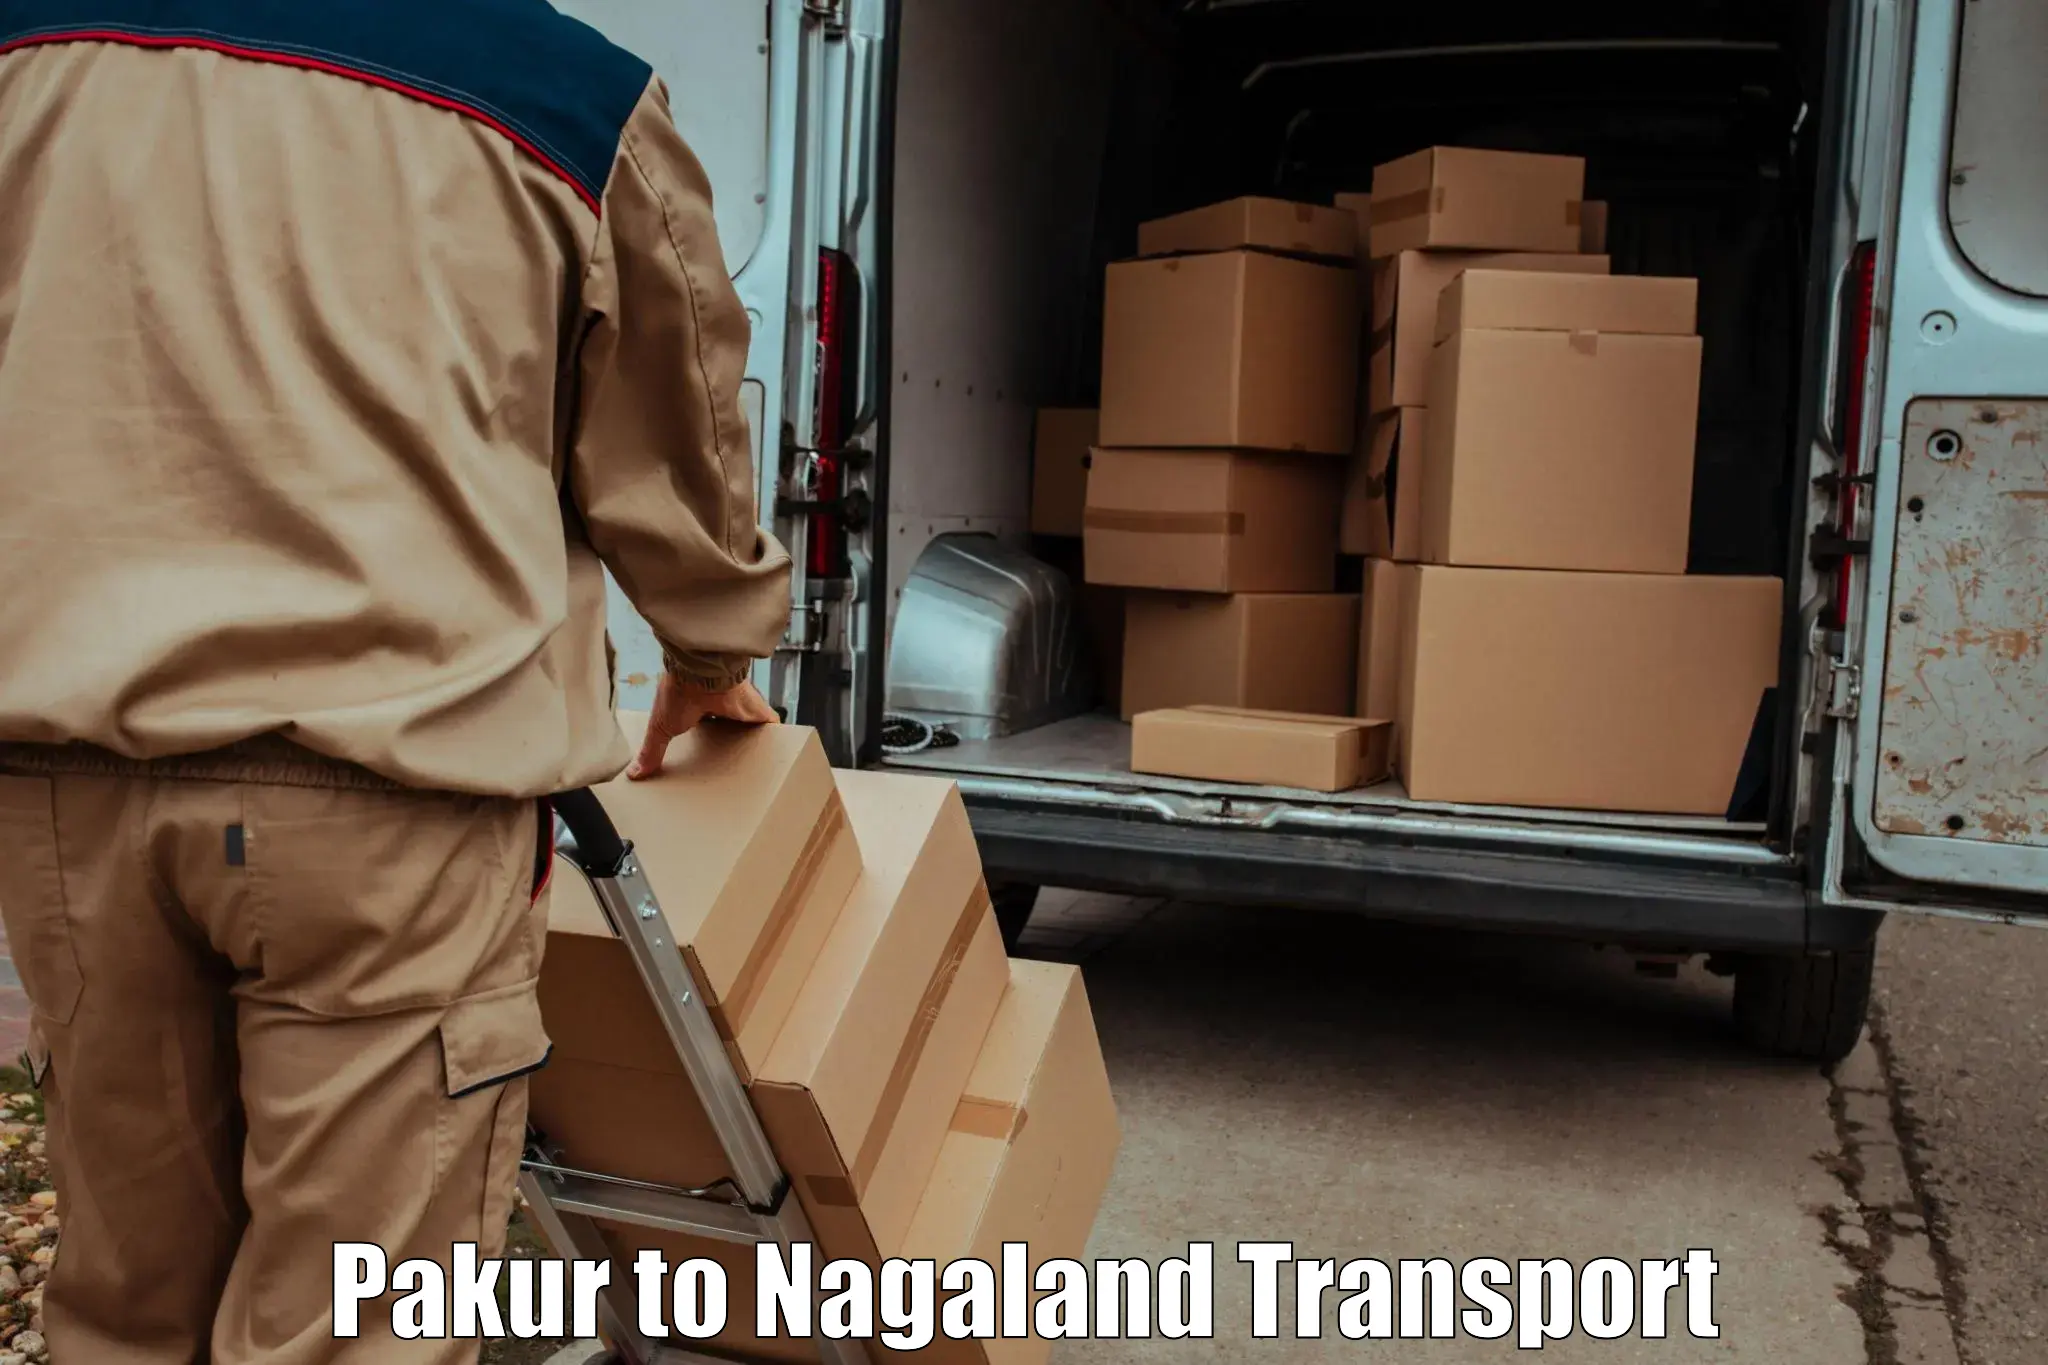 Vehicle transport services Pakur to Nagaland